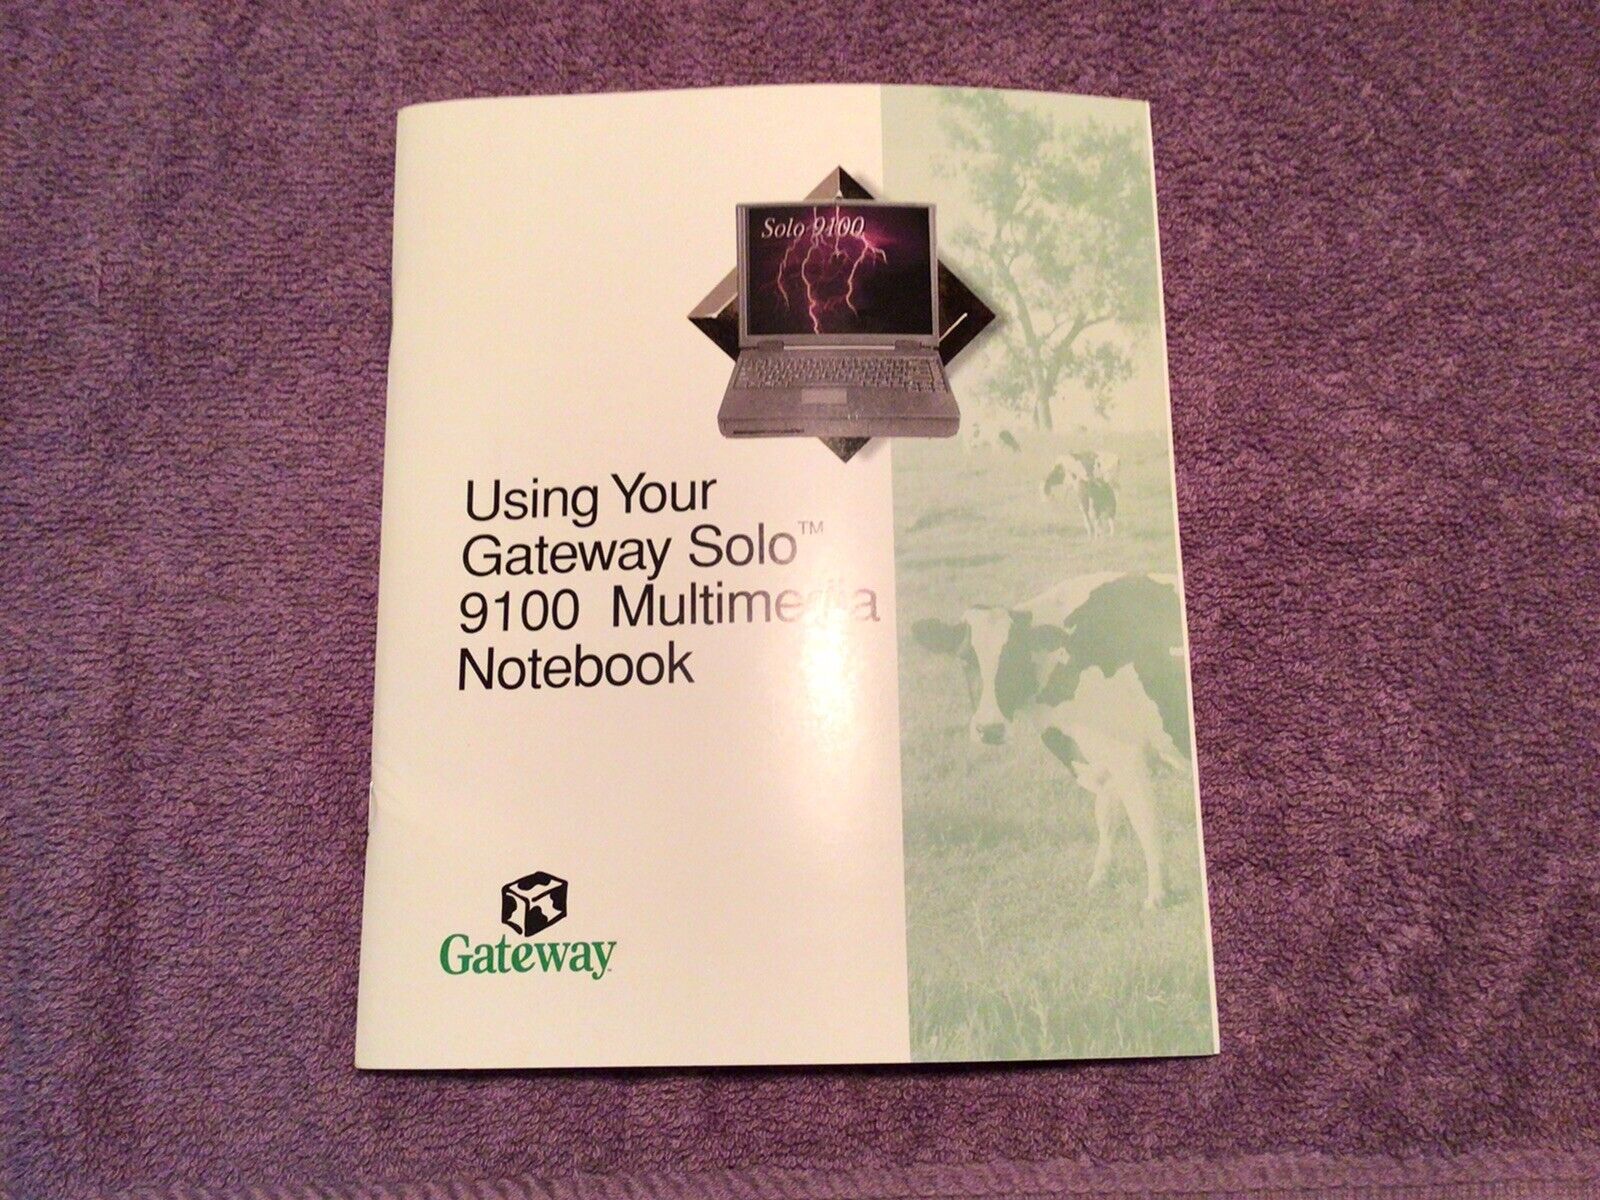 using your Gateway Solo 9100 Multimedia Notebook owners manual